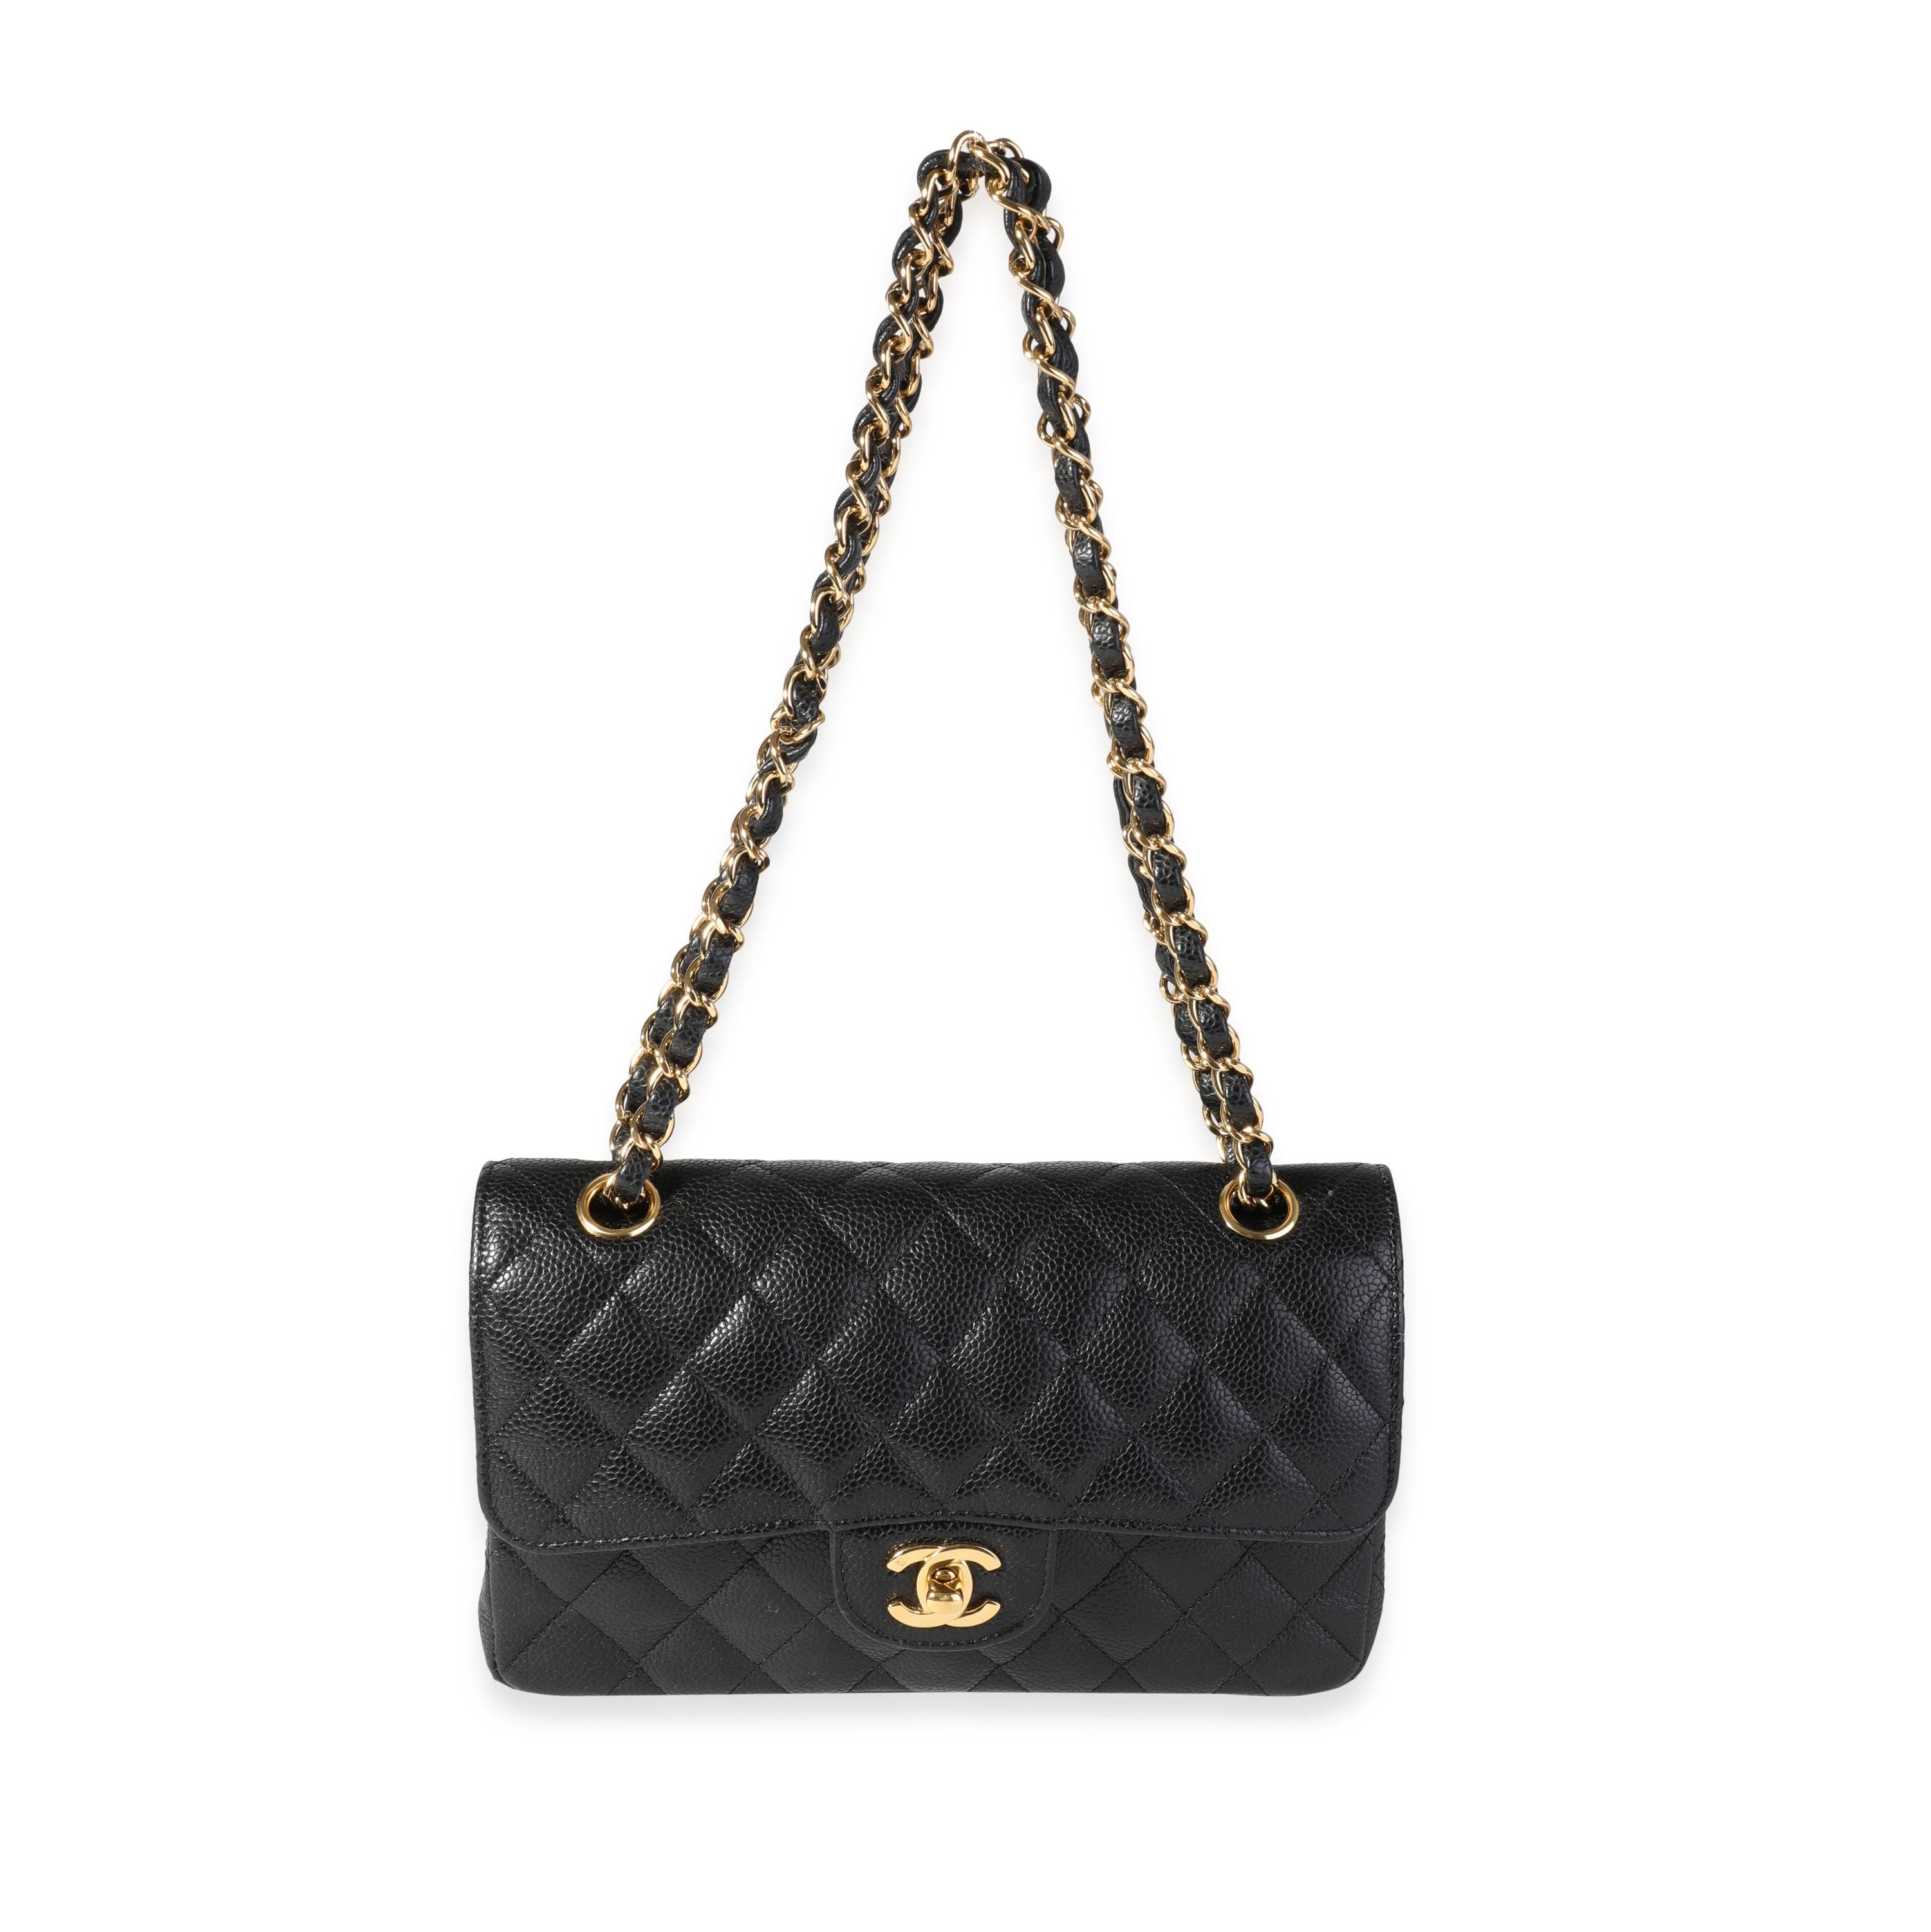 Listing Title: Chanel Black Quilted Caviar Small Classic Double Flap Bag
SKU: 119481
MSRP: 8200.00
Condition: Pre-owned (3000)
Handbag Condition: Excellent
Condition Comments: Minor scuffing at exterior corners.
Brand: Chanel
Model: Black Quilted